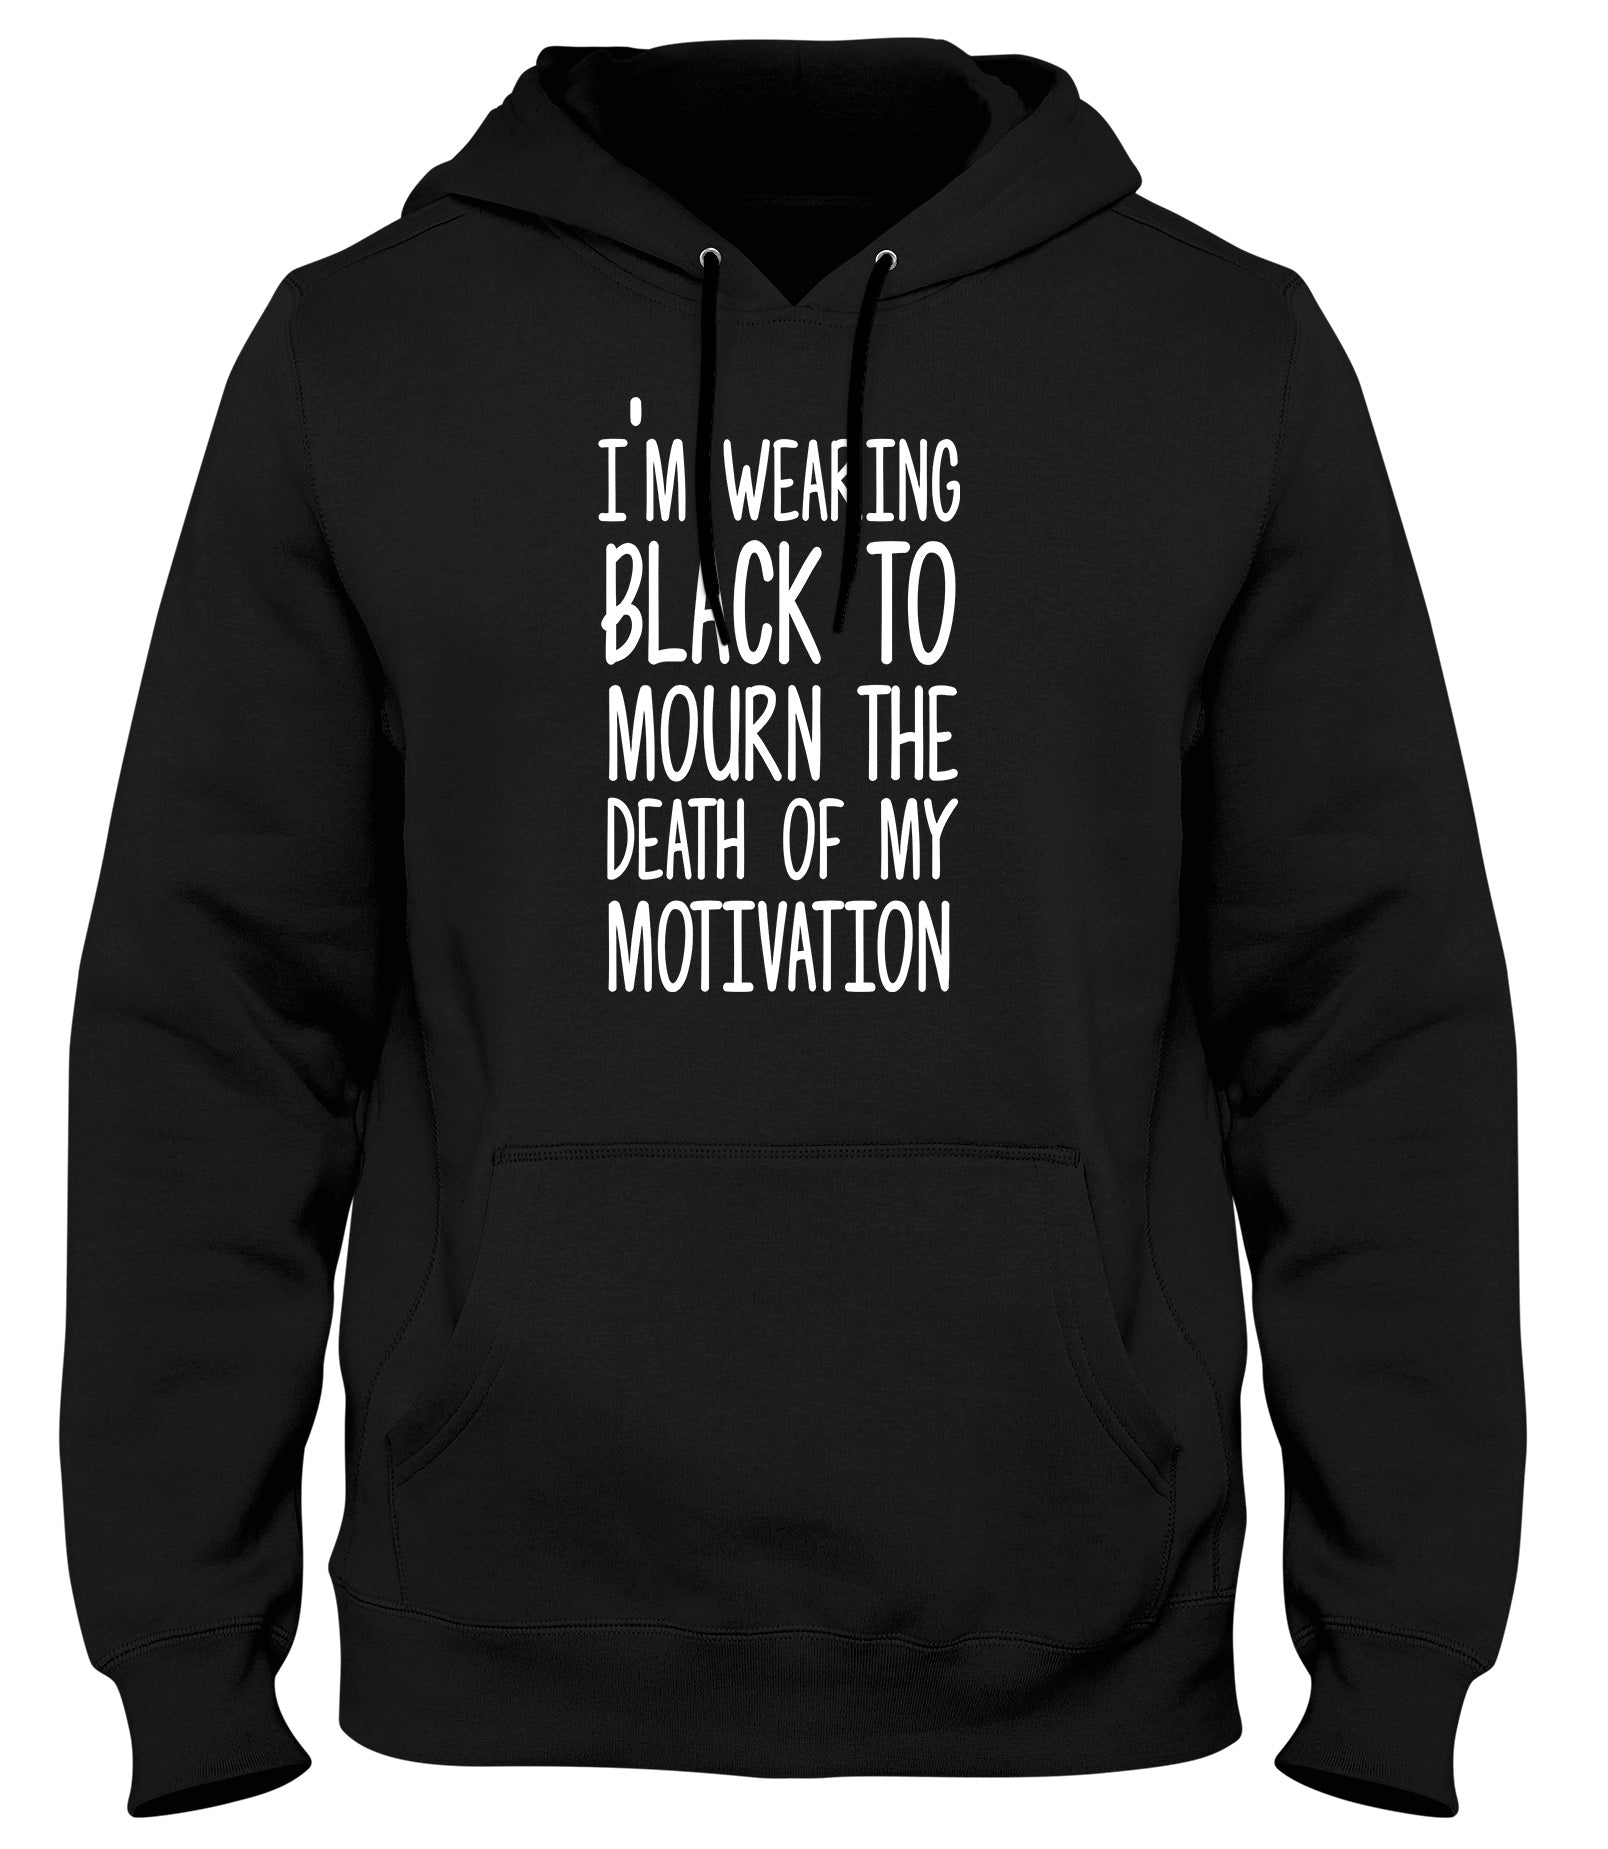 I'M WEARING BLACK TO MOURN THE DEATH OF MY MOTIVATION MENS LADIES WOMENS UNISEX HOODIE